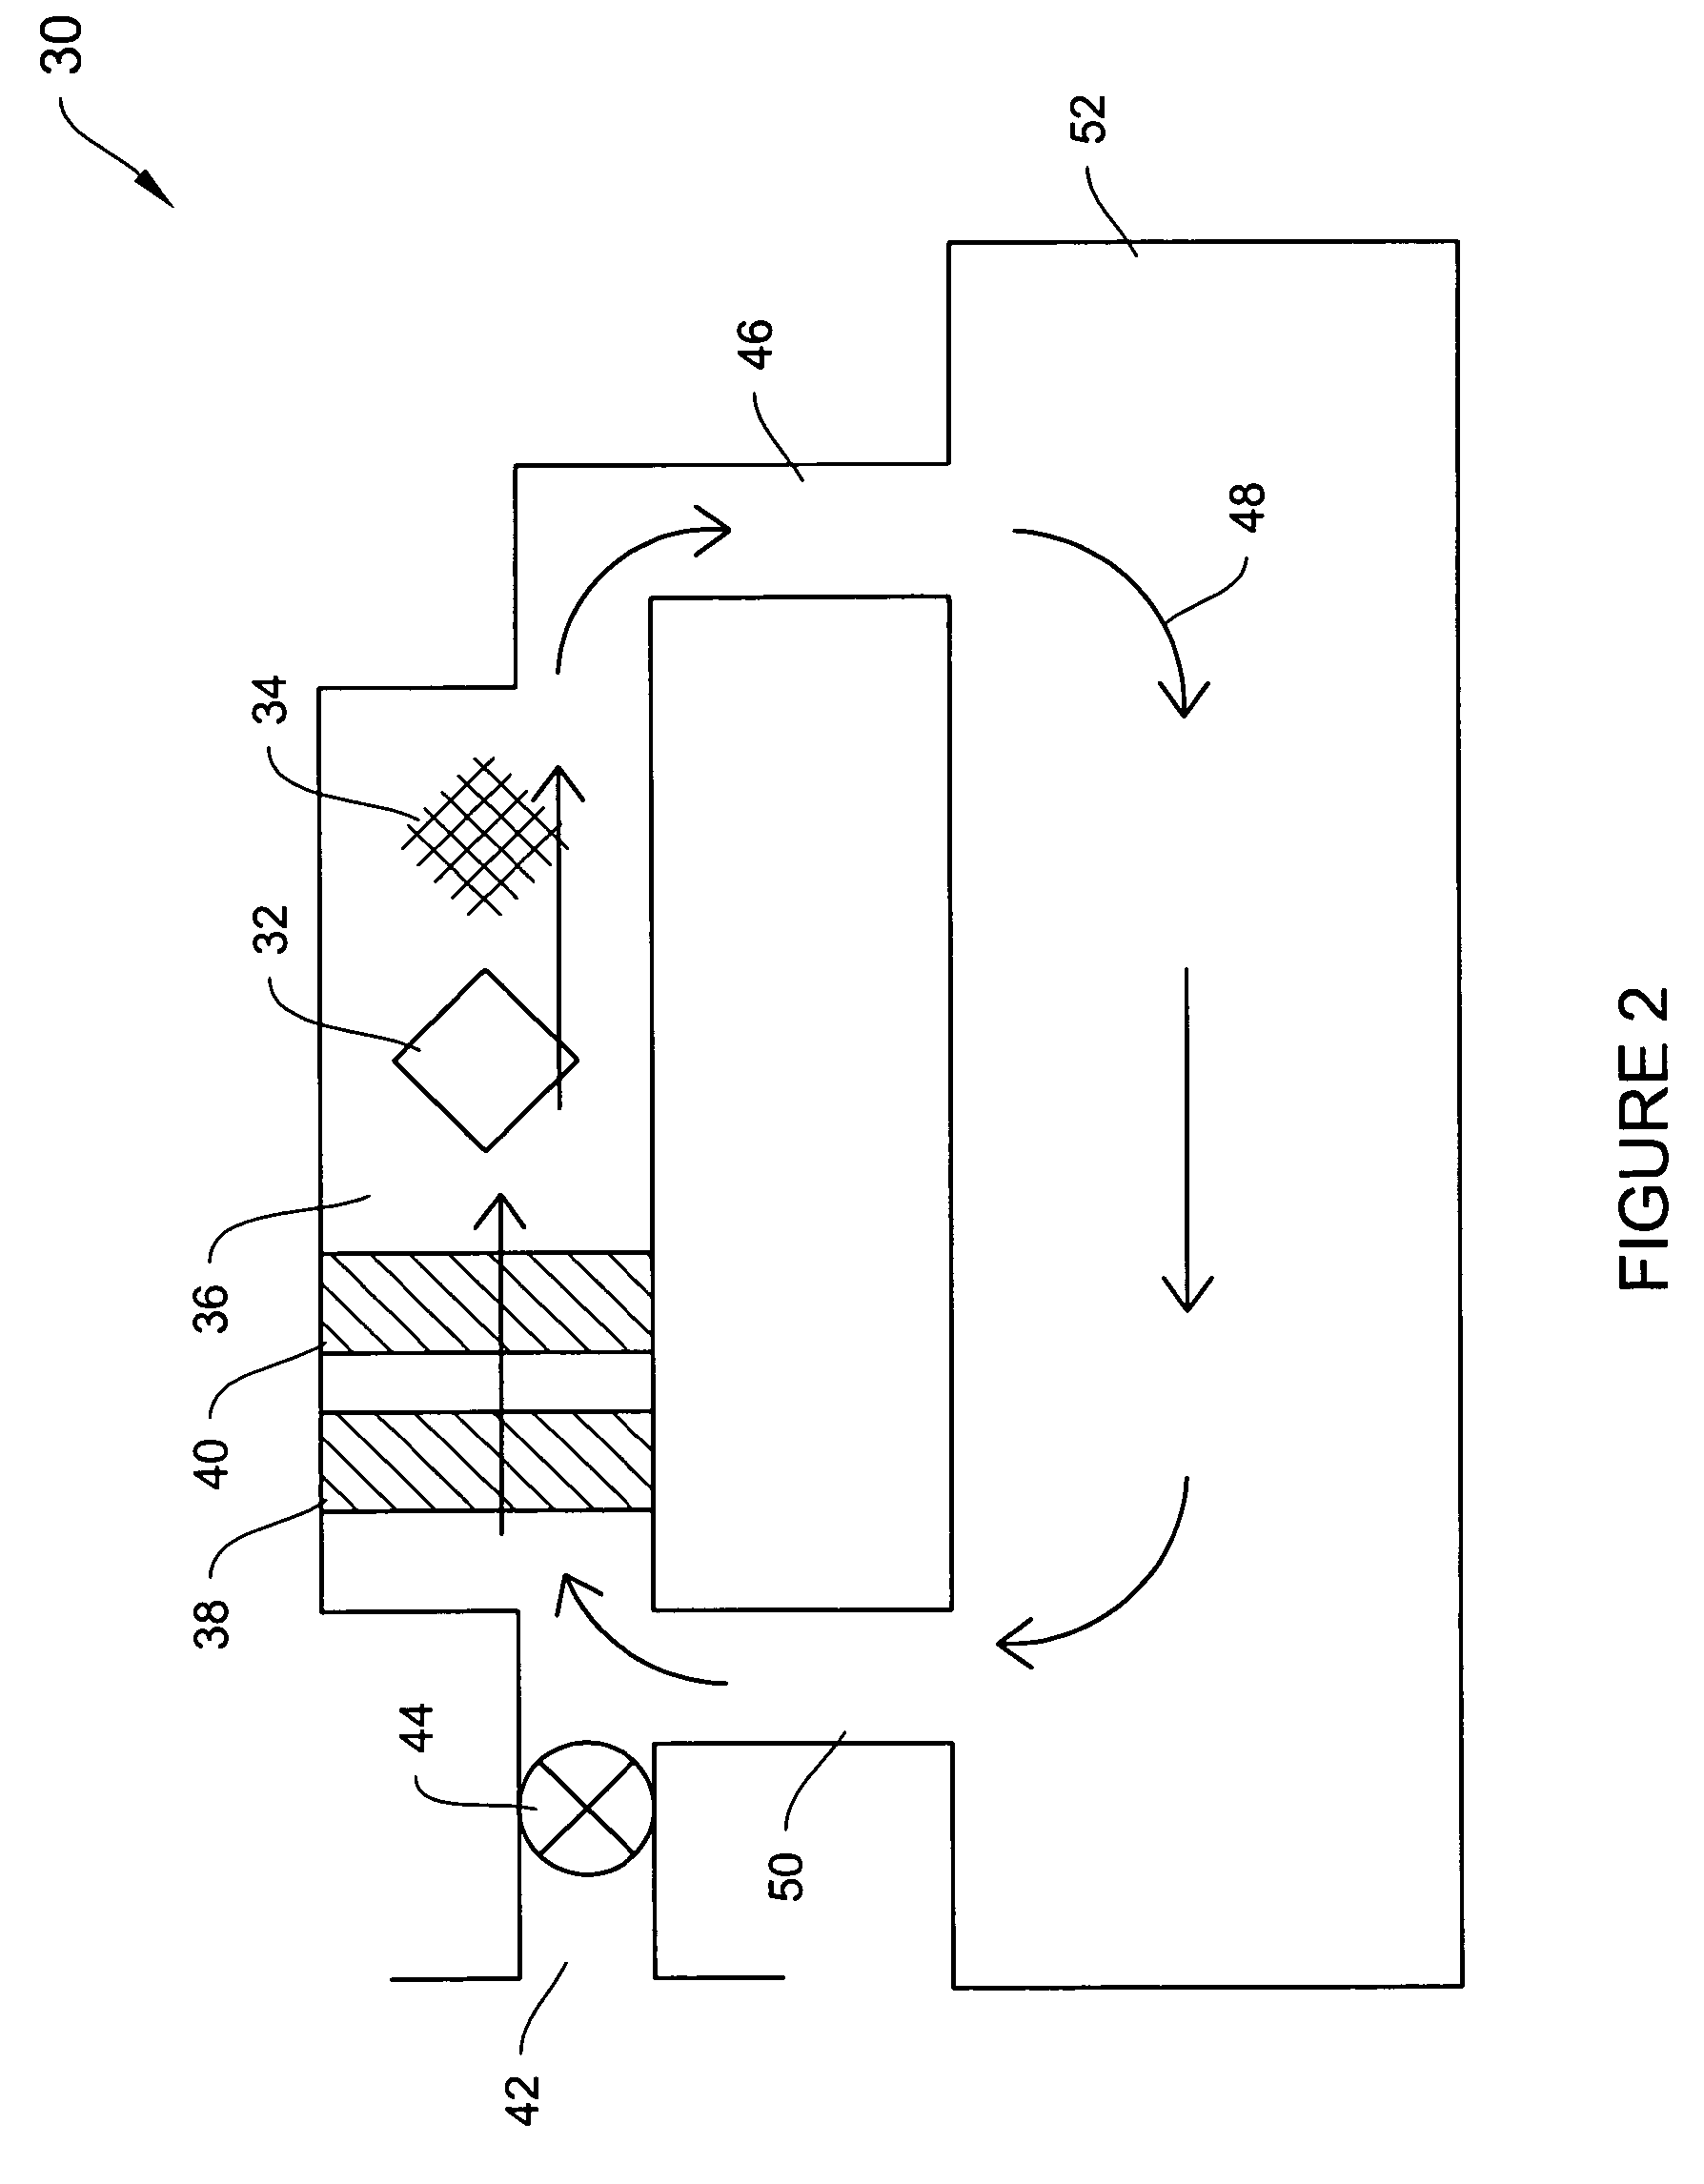 Solid-state gas flow generator and related systems, applications, and methods